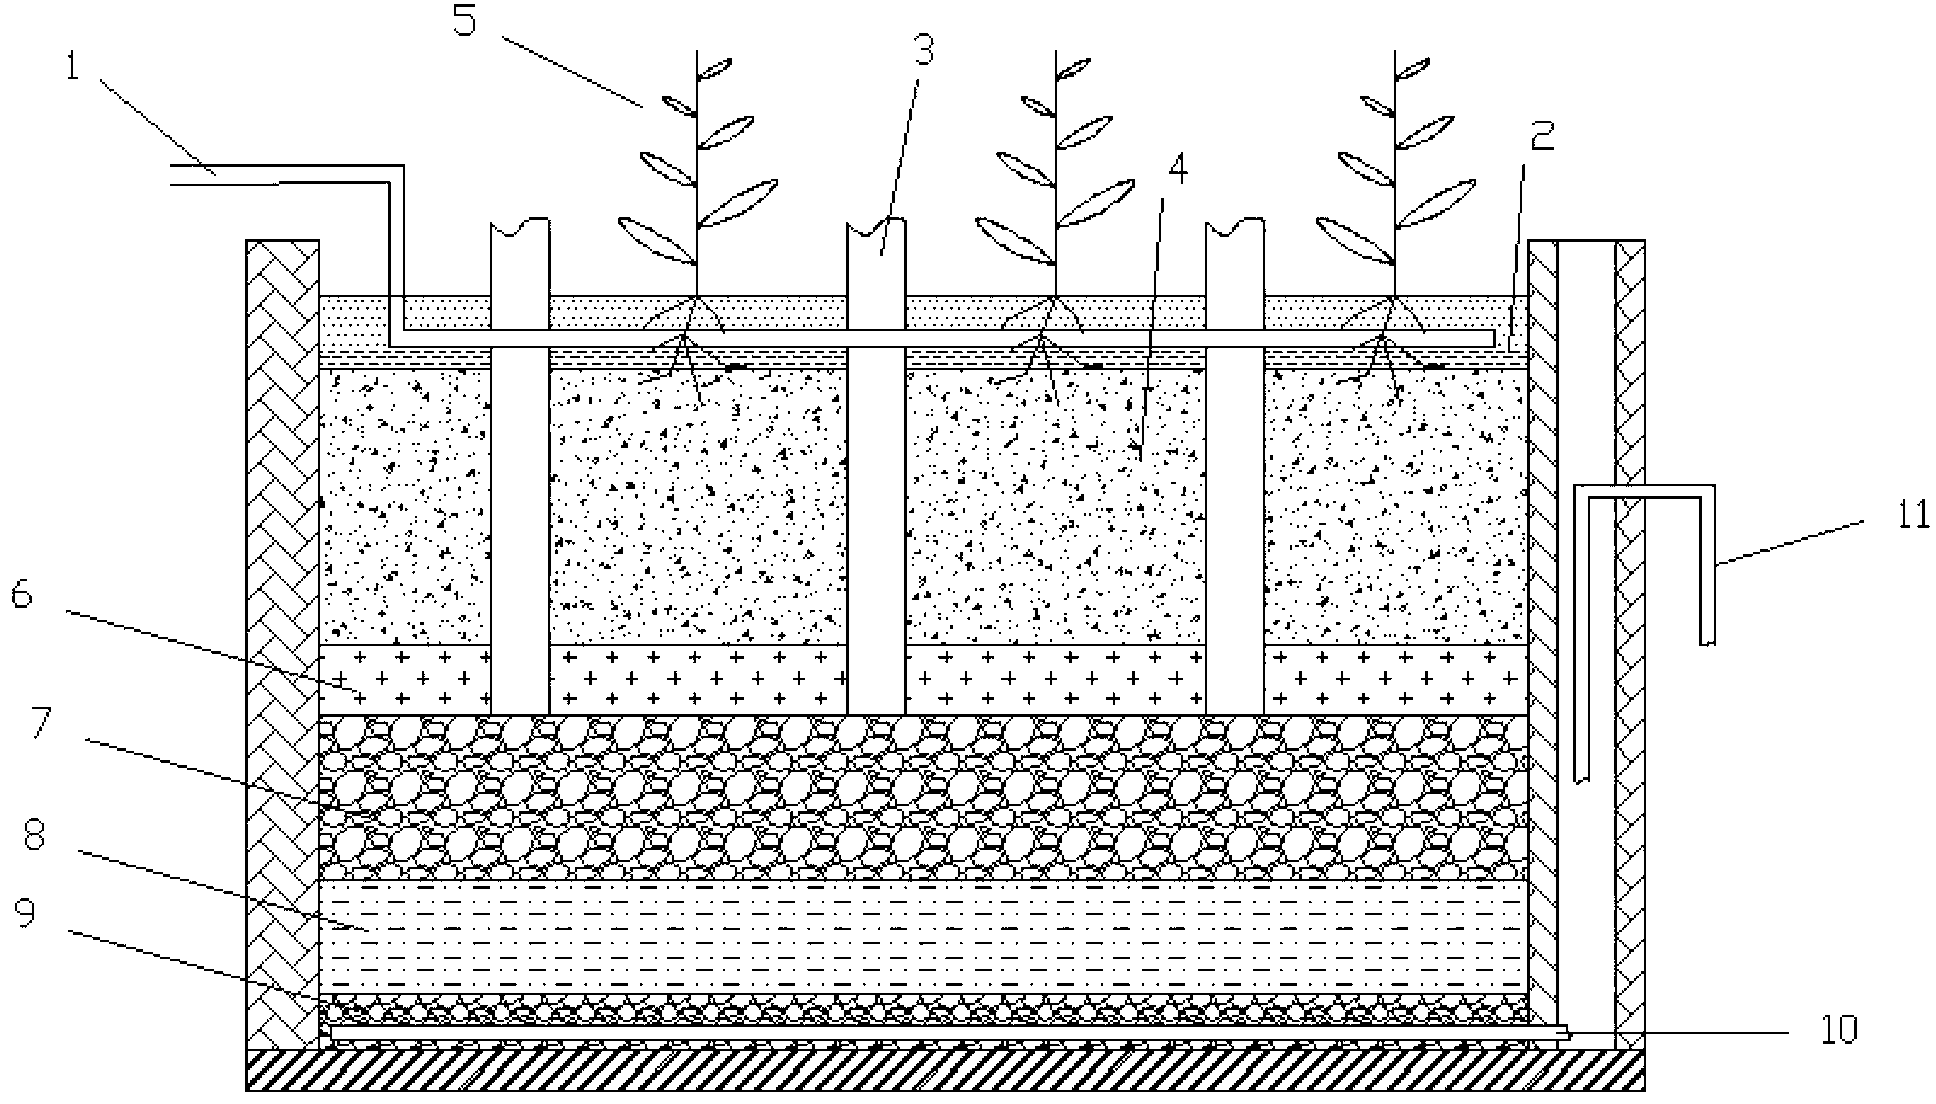 Zonal vertical current artificial wetland system with reinforced denitrification function